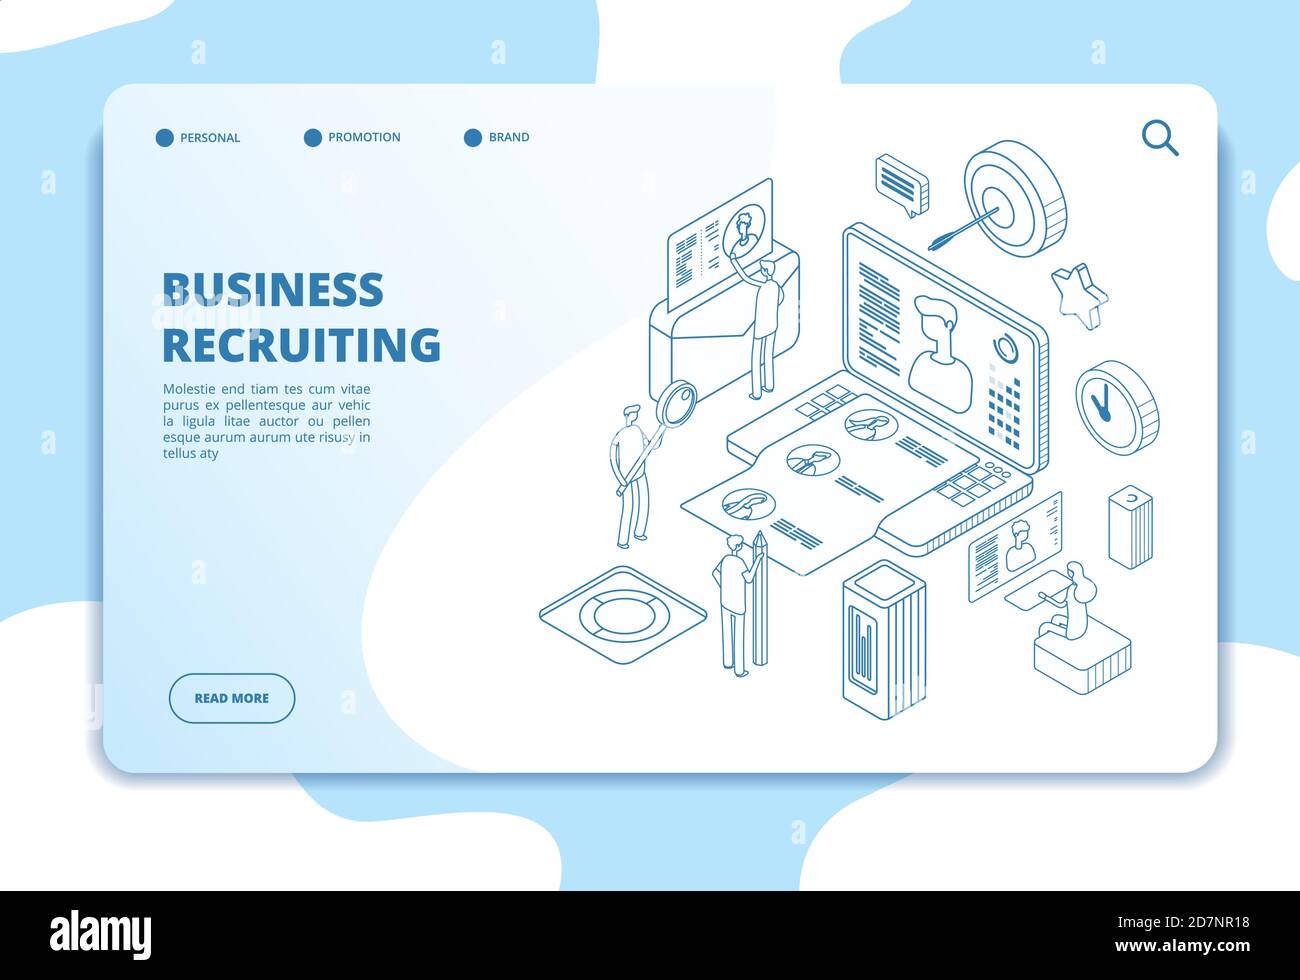 Recruitment agency landing page. Candidate and employer, human resources online recruitment and hiring 3d isometric vector concept. Recruitment and hiring online, technology management illustration Stock Vector